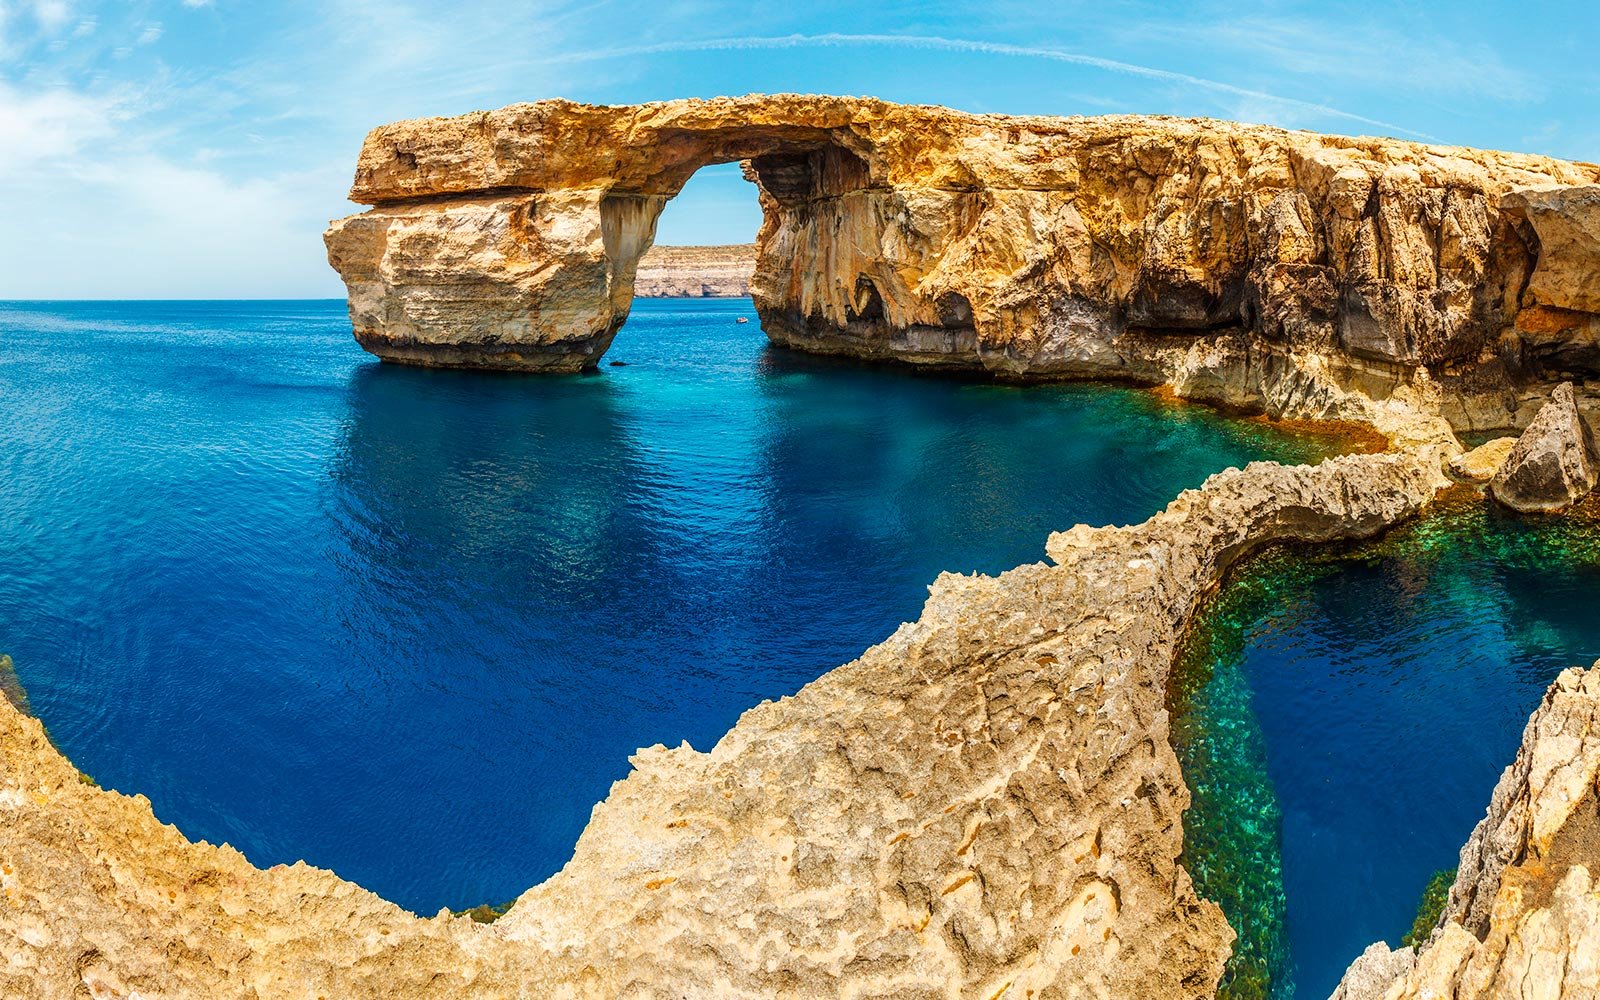 Malta-based Company Launches Stablecoin Backed by Euro: EURS